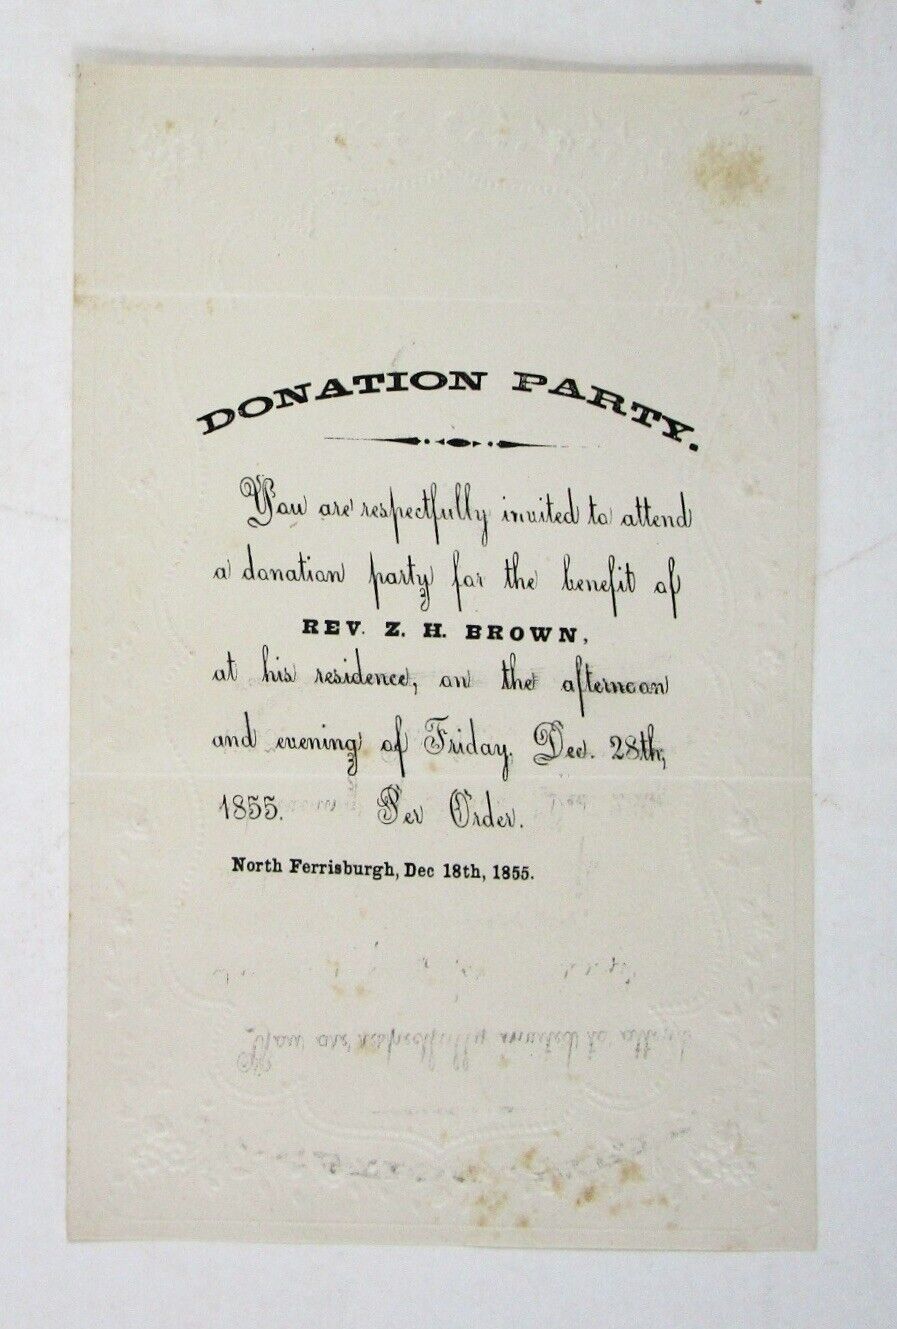 1855 Invitation to Donation Party of Rev. Z. H. Brown of North Ferrisburgh, VT